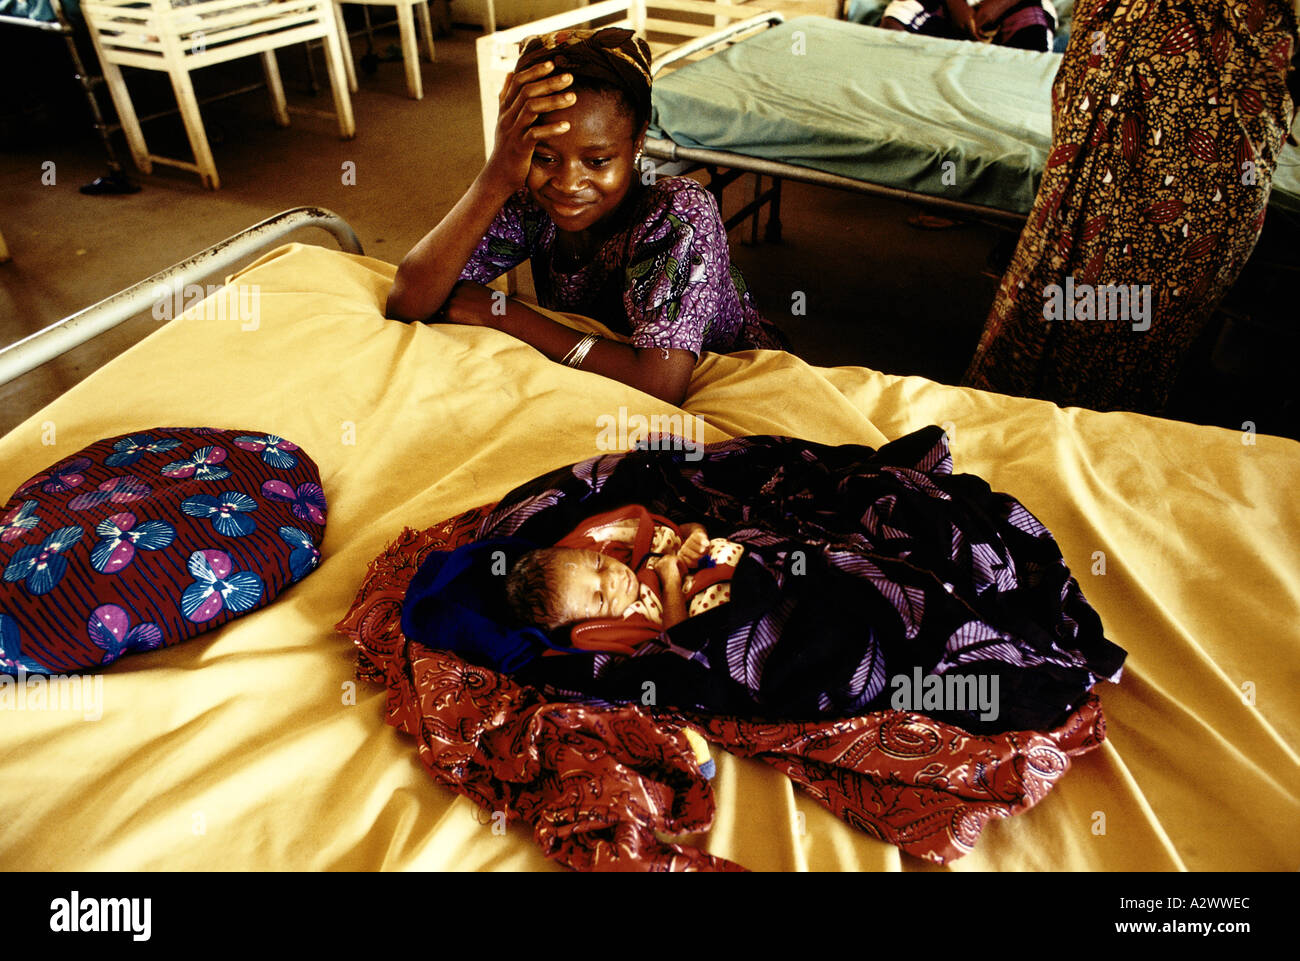 A baby lies on the bed while the proud mother  looks on in the post natal ward at Segbwema Hospital, Sierra Leone, Africa Stock Photo